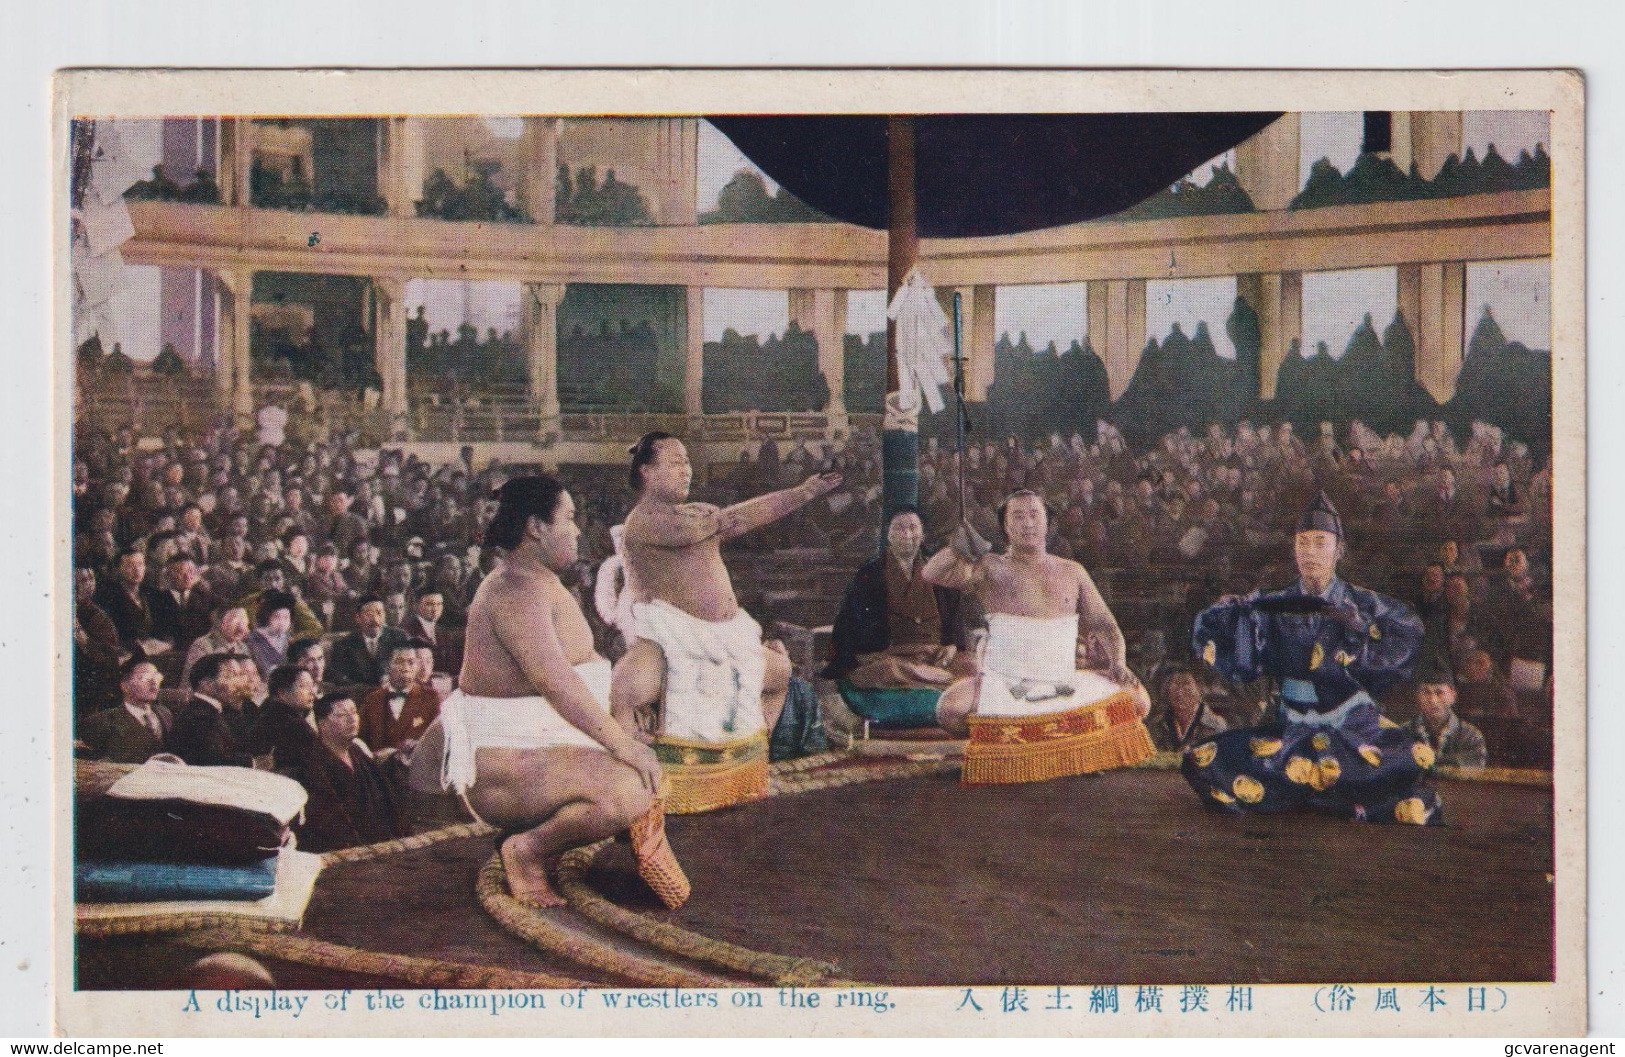 SUMO  YOKOZUMA   1912  A DISPLAY OF THE CHAMPION OF WRESLERS ON THE RING - Kampfsport